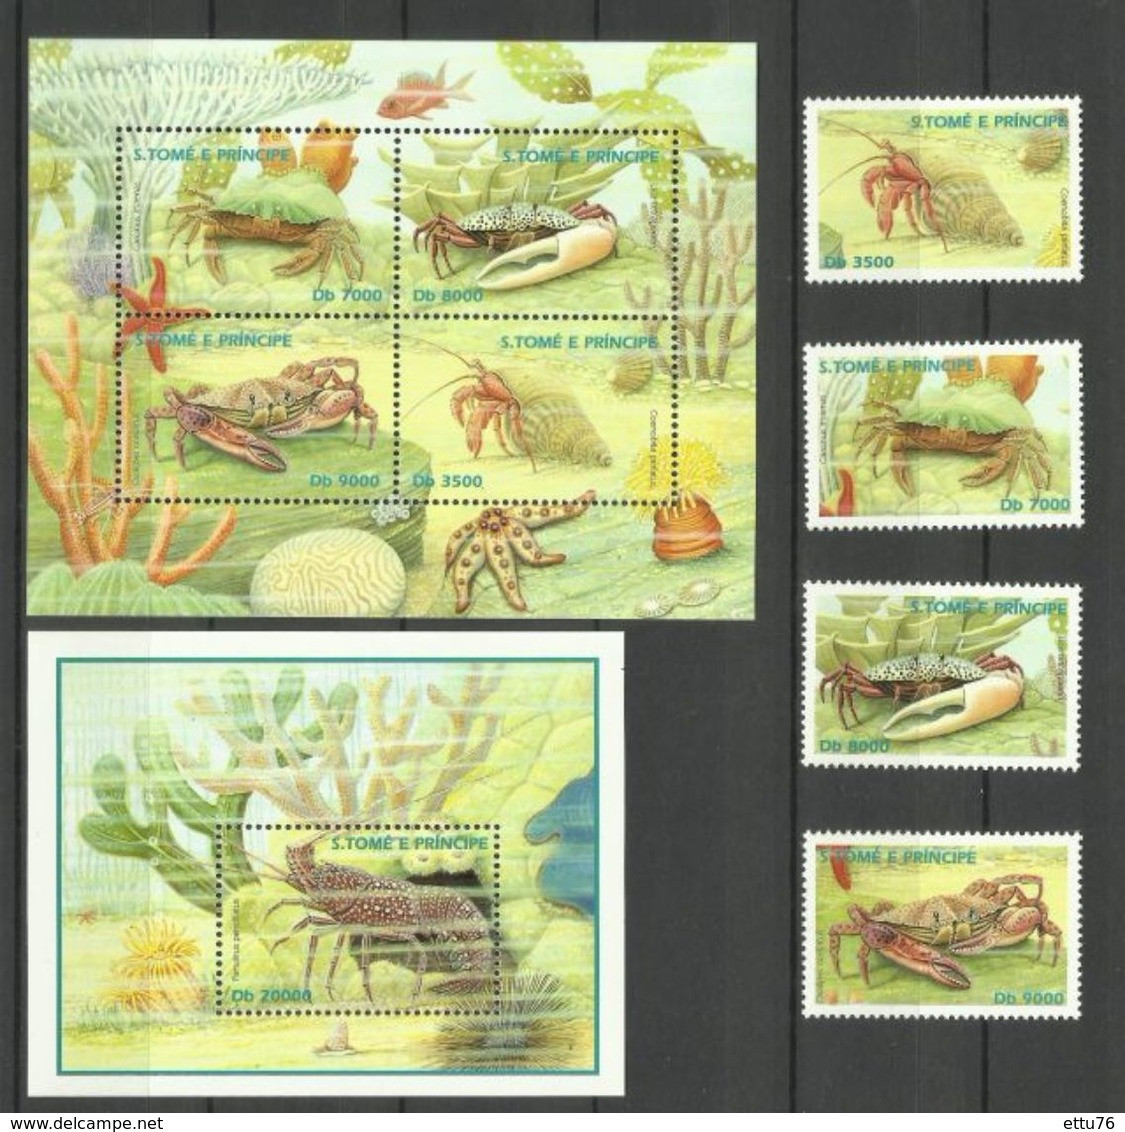 Sao Tome E Principe  2003  Crustaceans,Crabs,Lobsters  Set & Sheets  MNH - Schalentiere